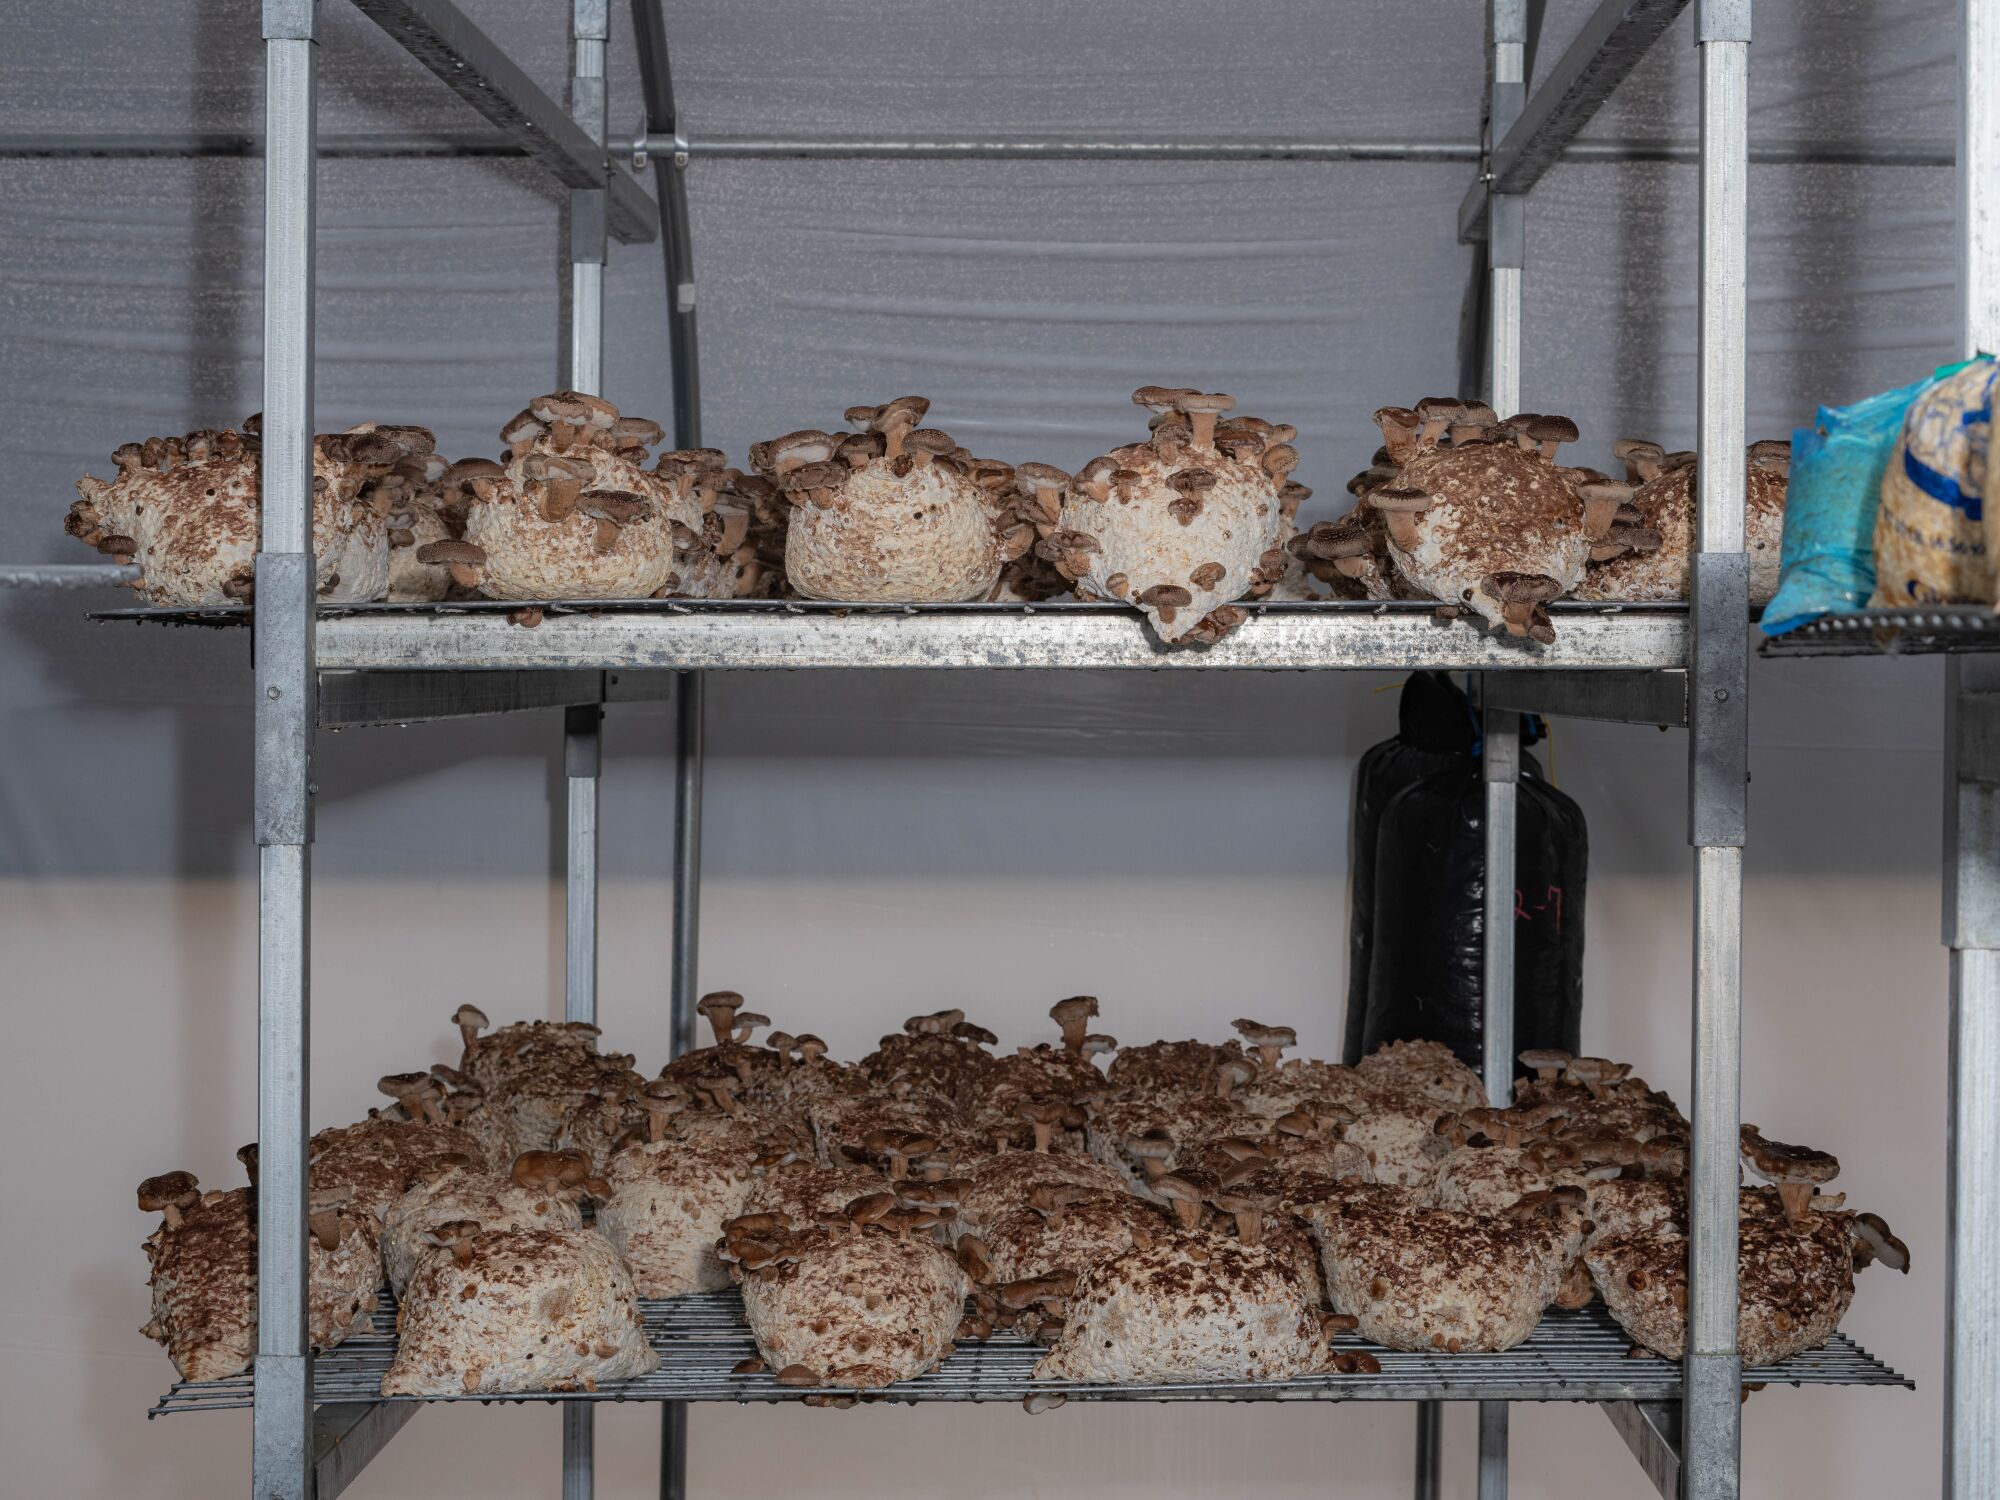 A metal cart showing two shelves full of mushrooms.